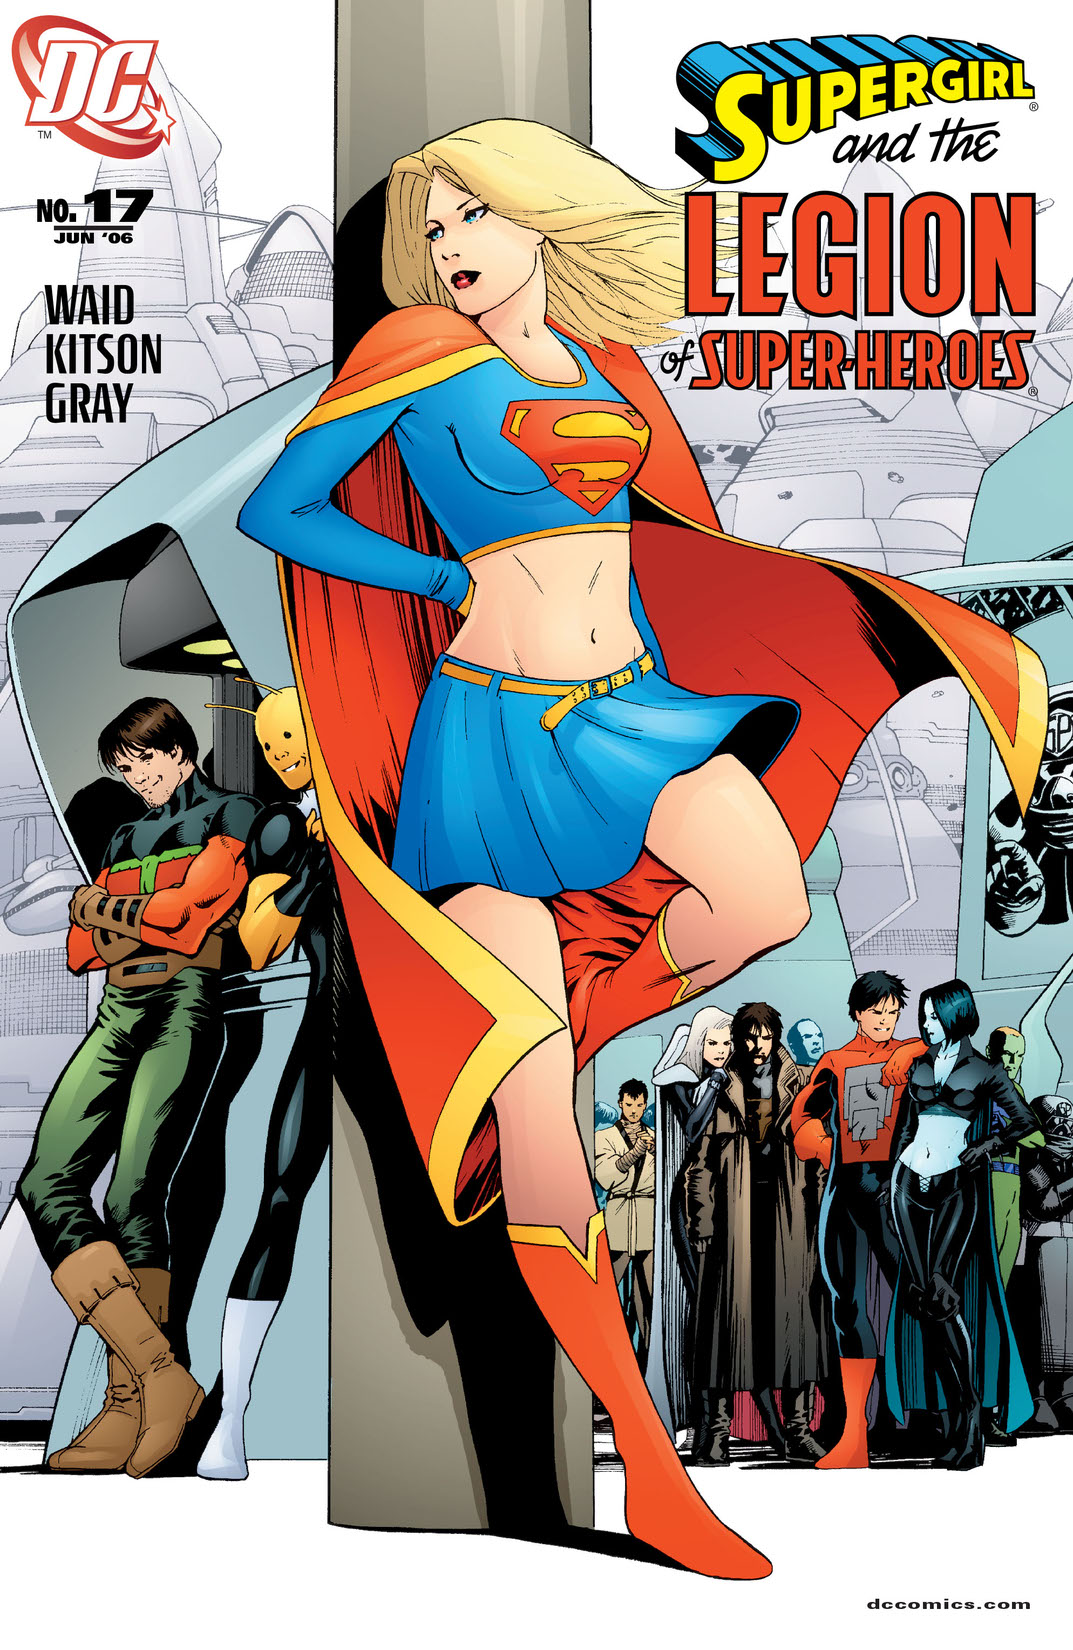 Supergirl and The Legion of Super-Heroes (2006-) #17 preview images